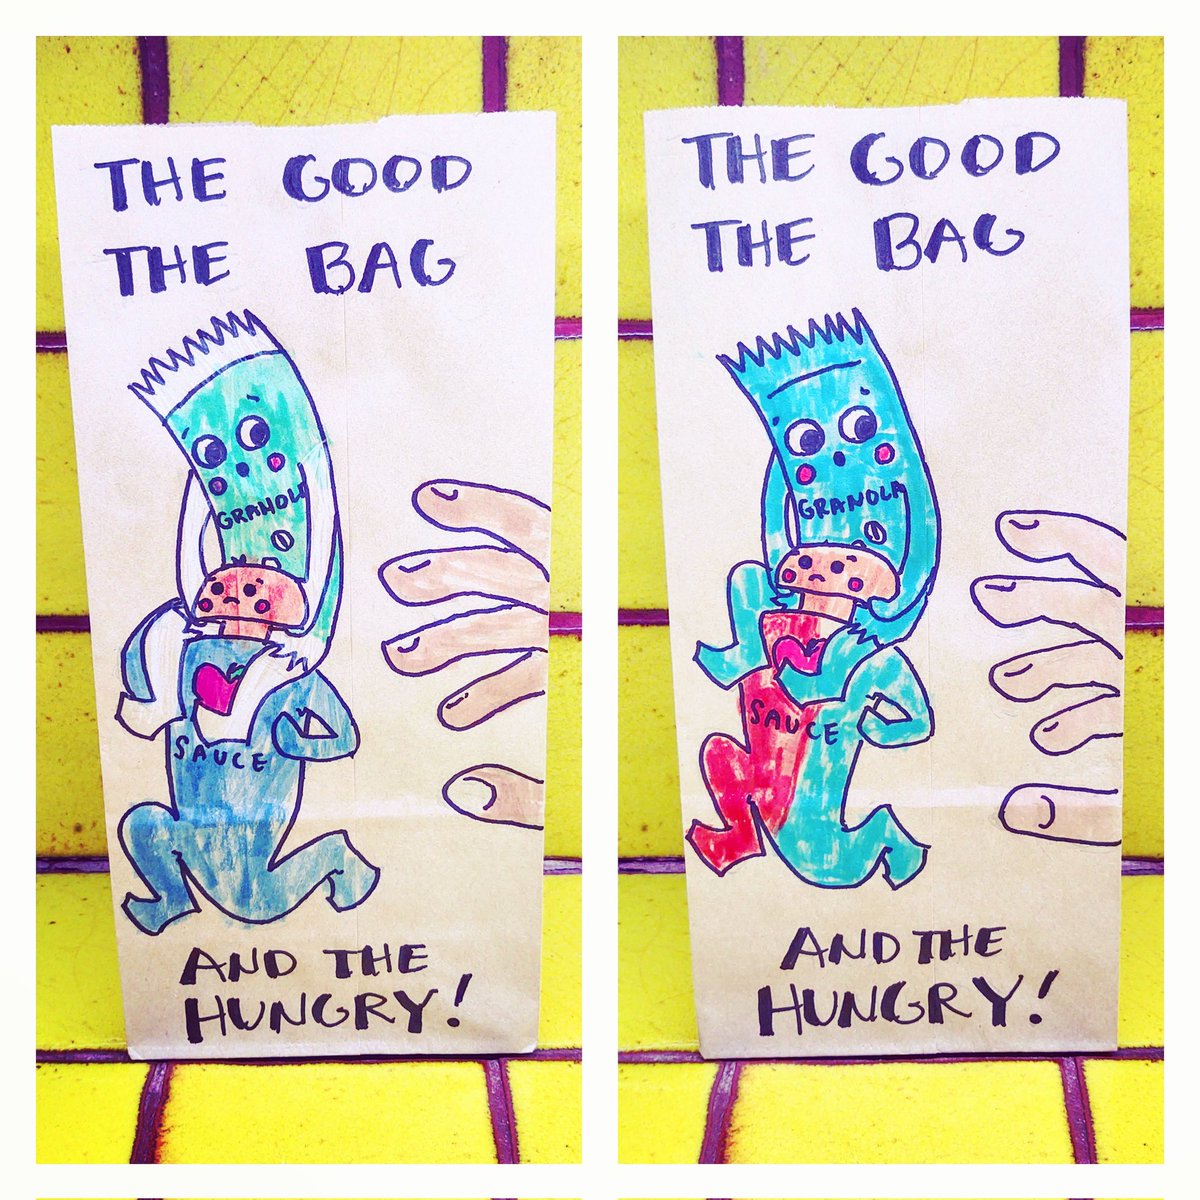 The GOOD, the BAG, and the HUNGRY! 😅
Art by me + colors by my kiddos! Our before school ritual✨
#bagtoschool #artist #illustration #snackbag #womanwhodraw #positivity #paperbag